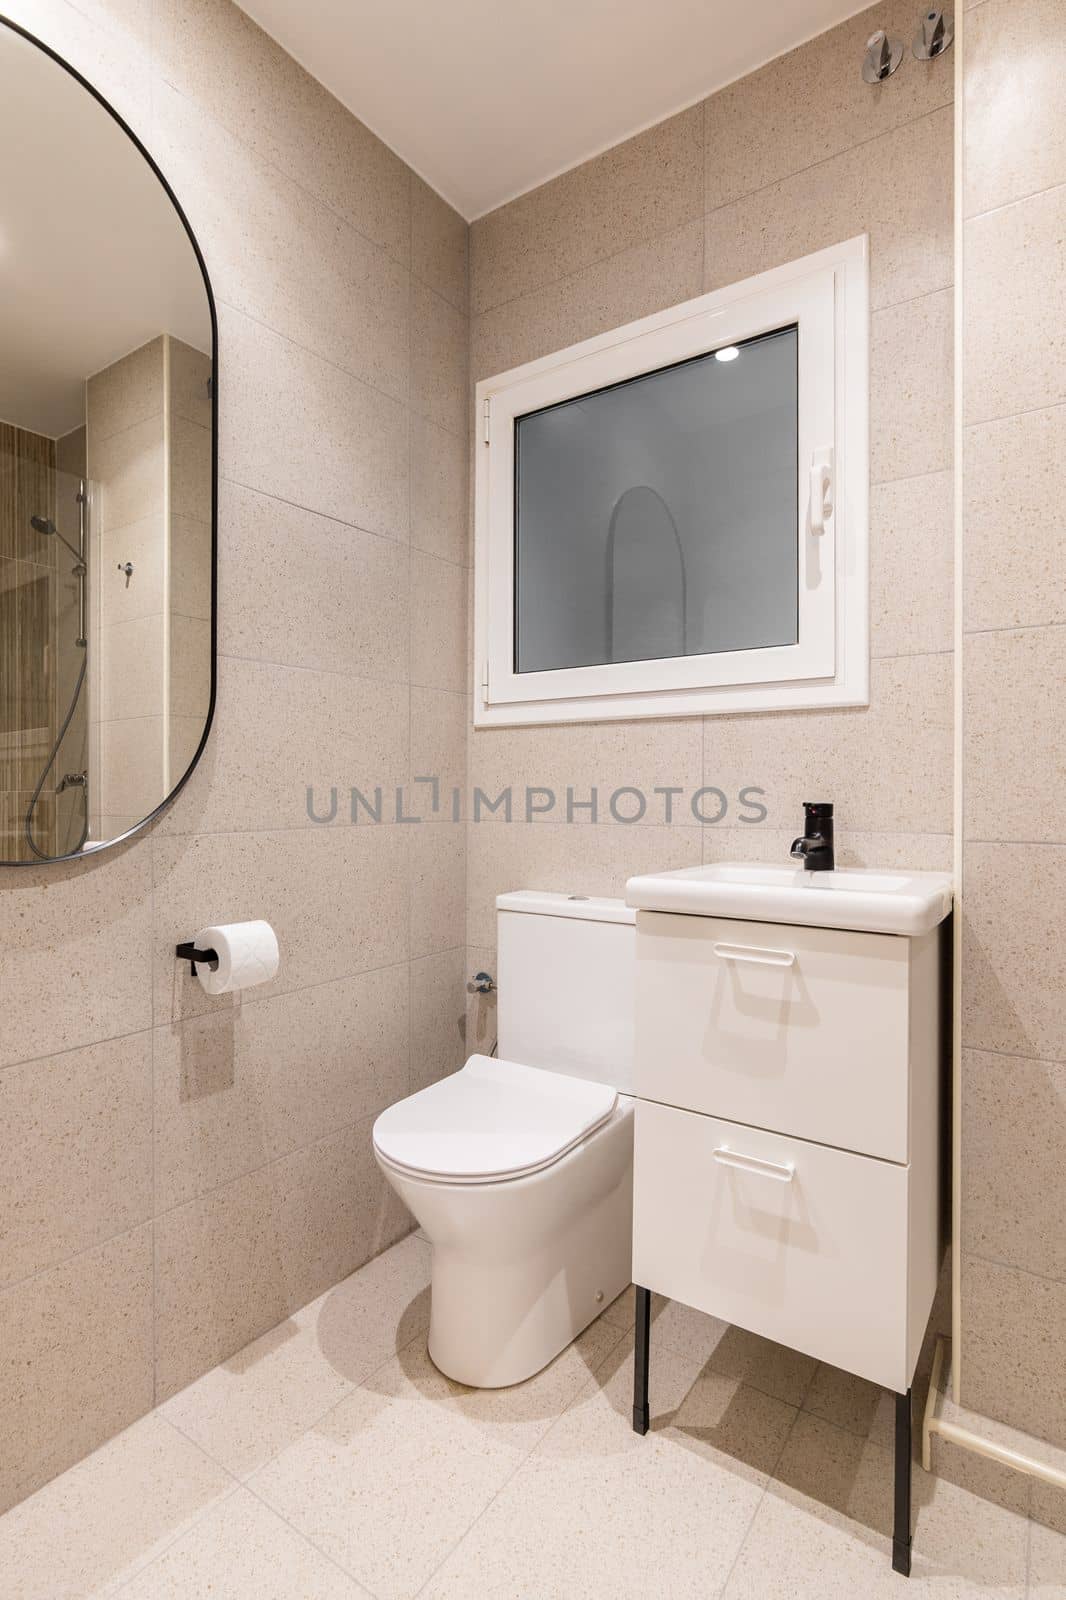 Part of bathroom with toilet bowl, washbasin on table, beautiful oval mirror on wall lined with beige marble tiles, in which you can see reflection of shower area with metal fittings